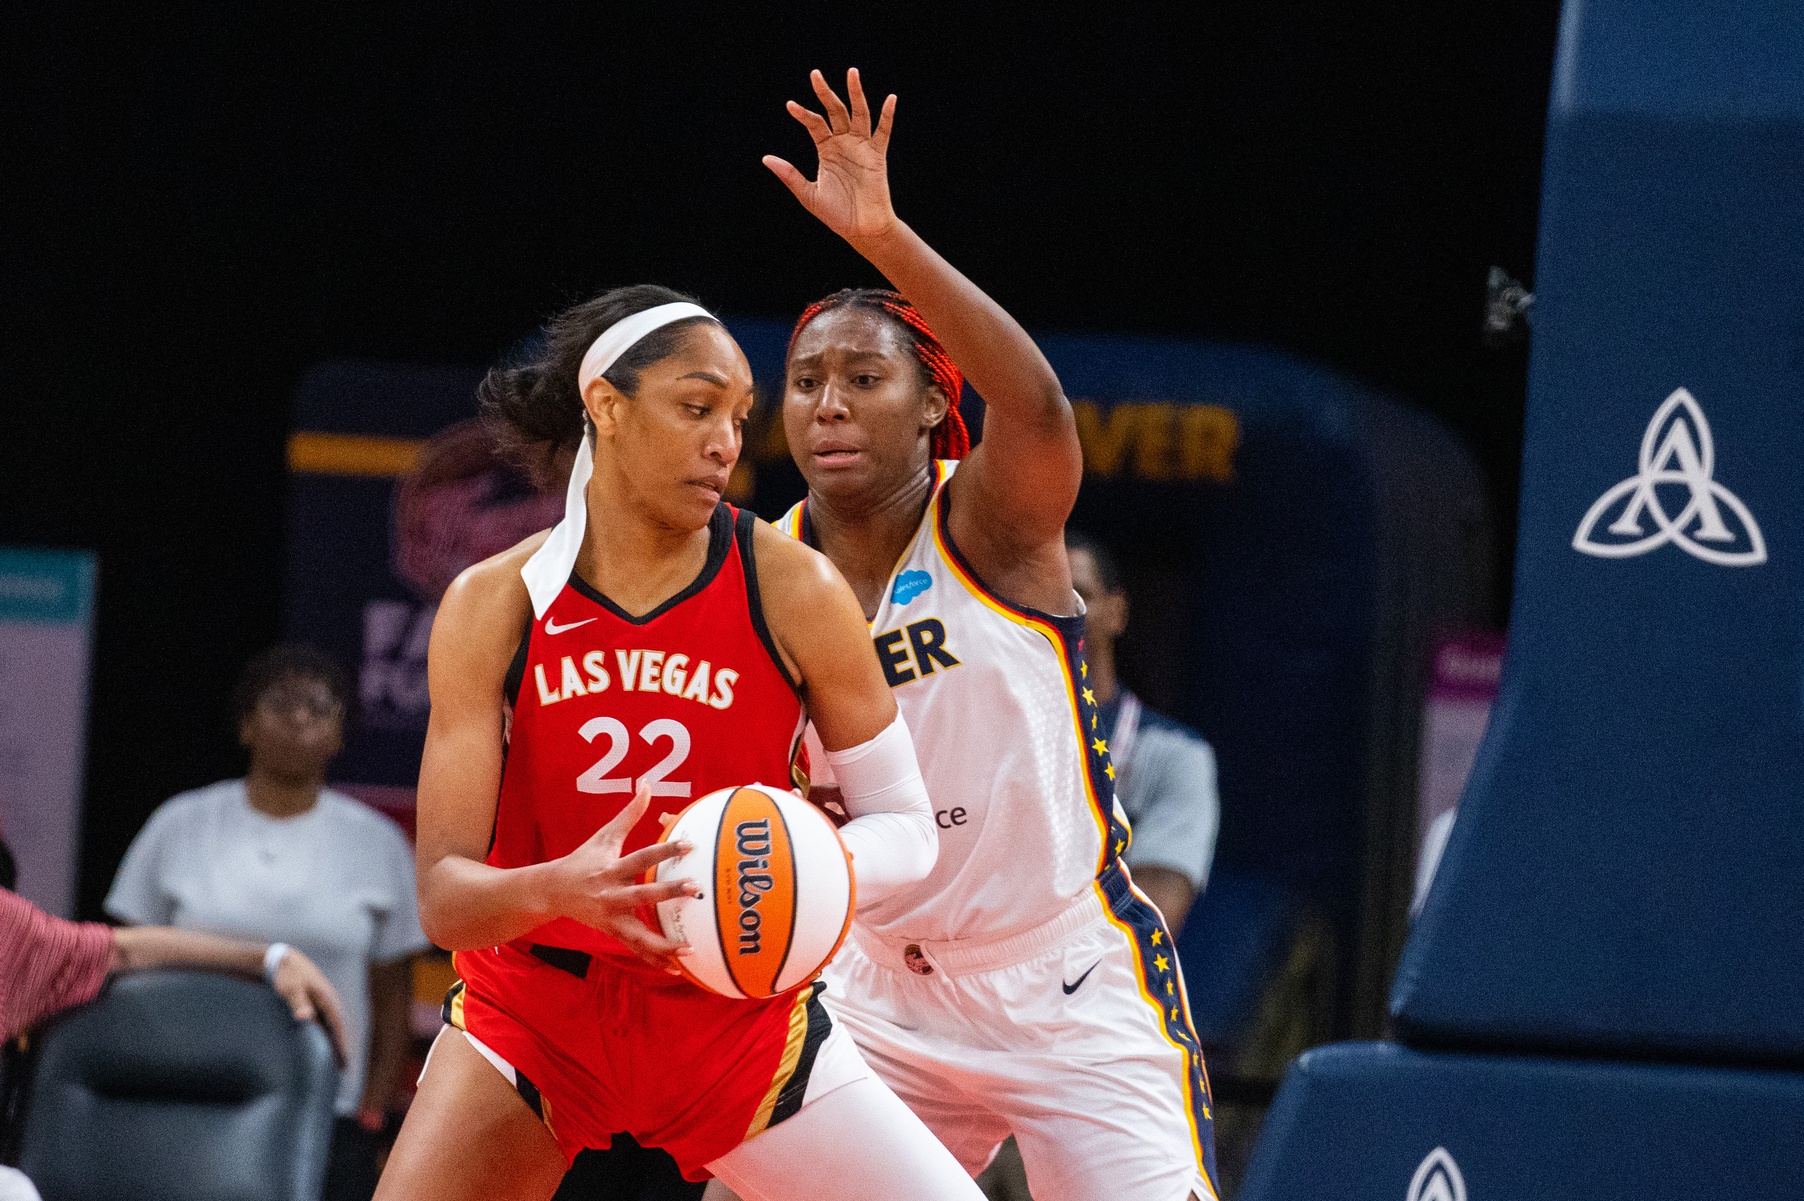 WNBA rosters: Which rookies made the cut? - Just Women's Sports